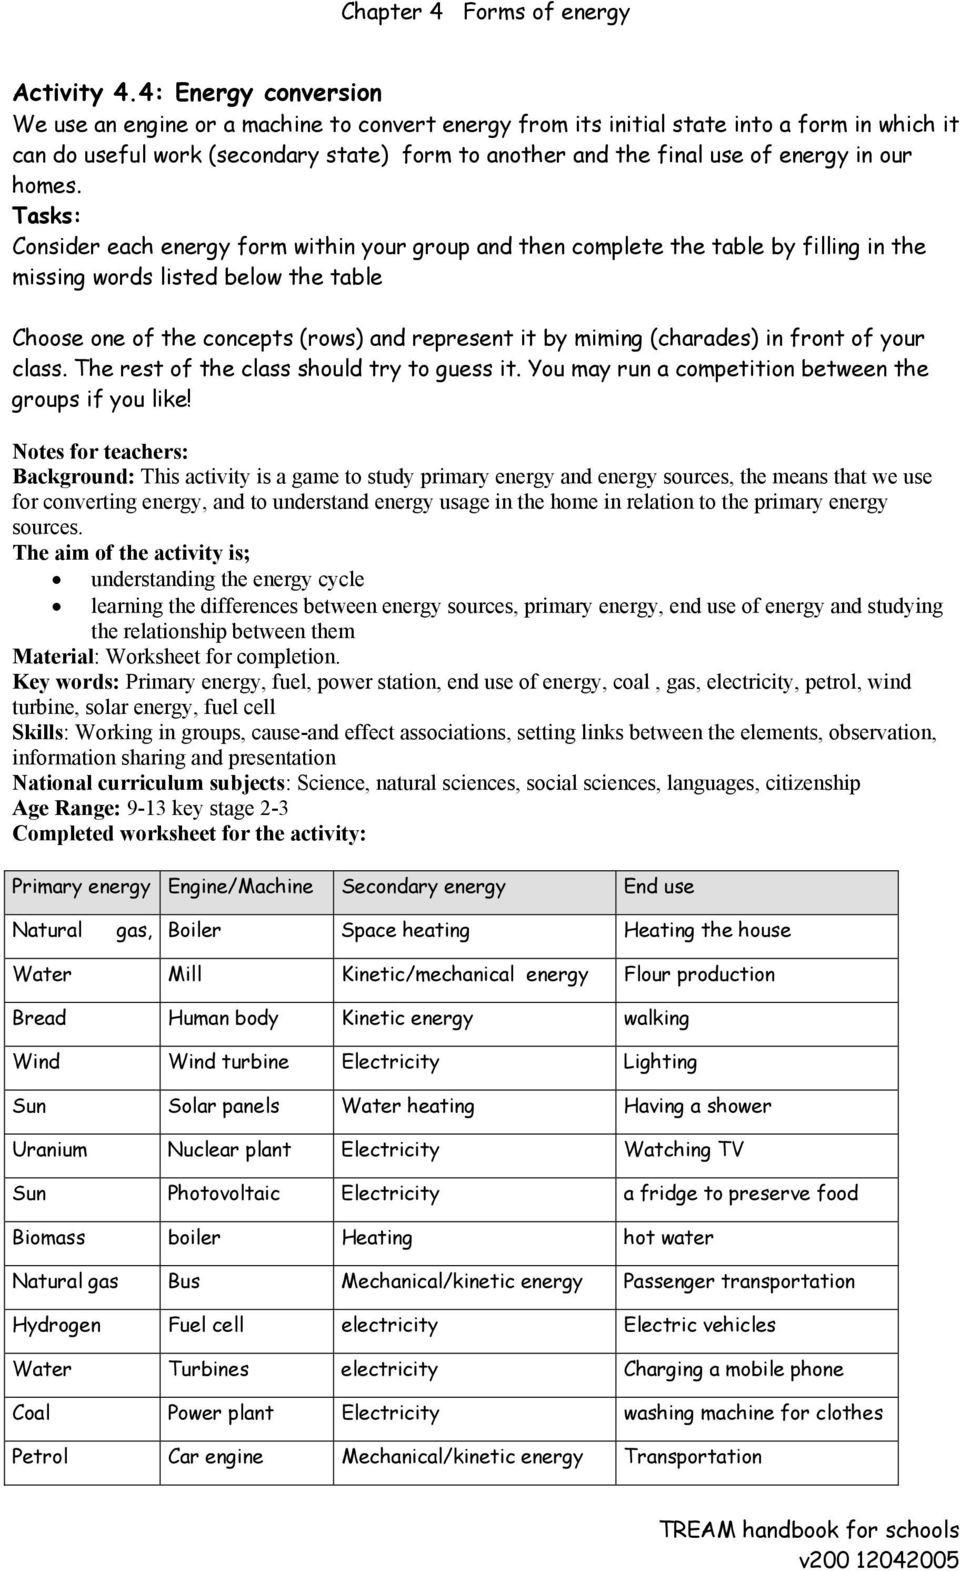 Energy Transformation Worksheet Answers Chapter 4 forms Of Energy Pdf Free Download